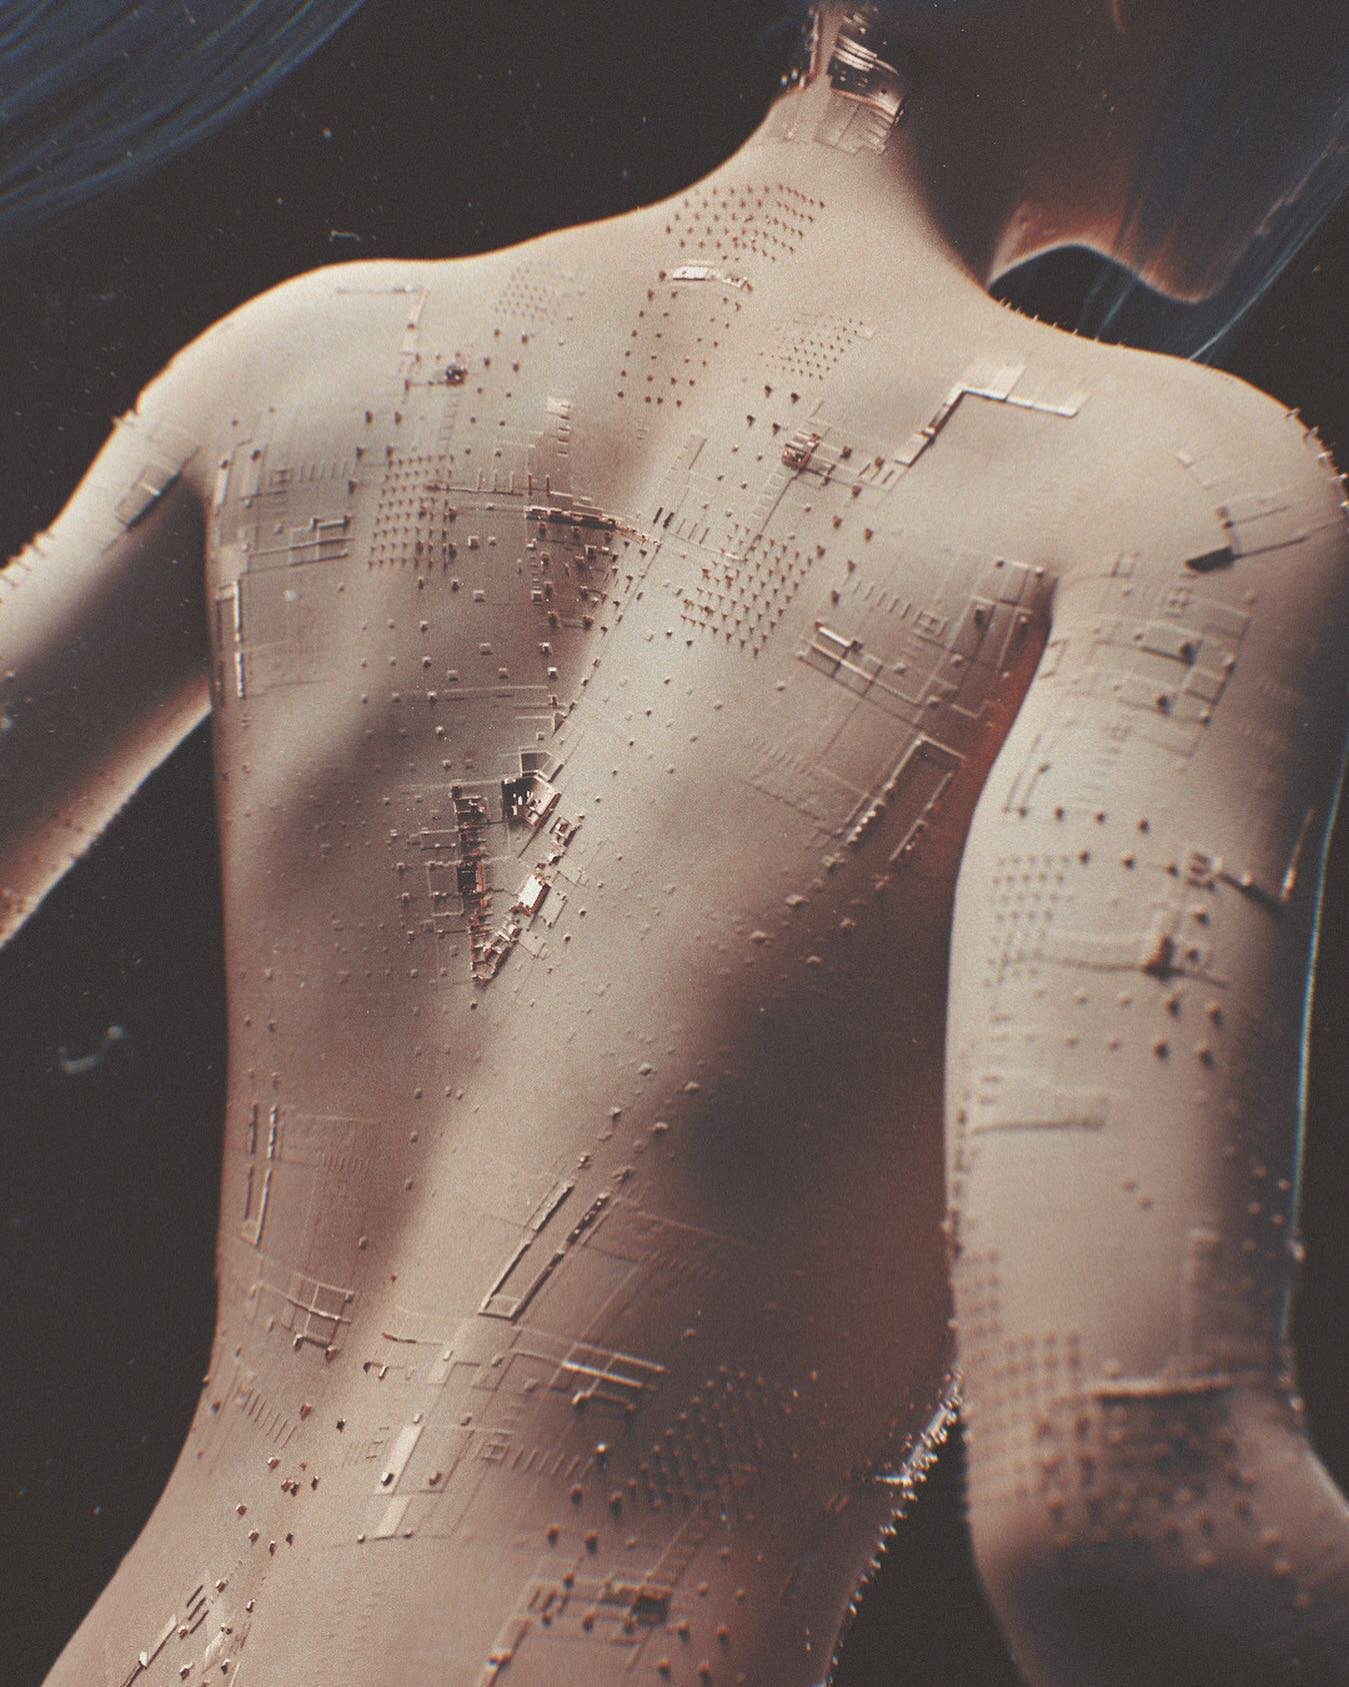 &bull; Agosto 17 &bull;

From now on everything is work in fucking progress.

.
.
.
.
.
#daz3d #cinema4d #3D #c4d #aftereffects #motiondesign #motiongraphics #redshift3d #arnoldrender #octanerender #mdcommunity #photoshop #concept #skinshader #skin #